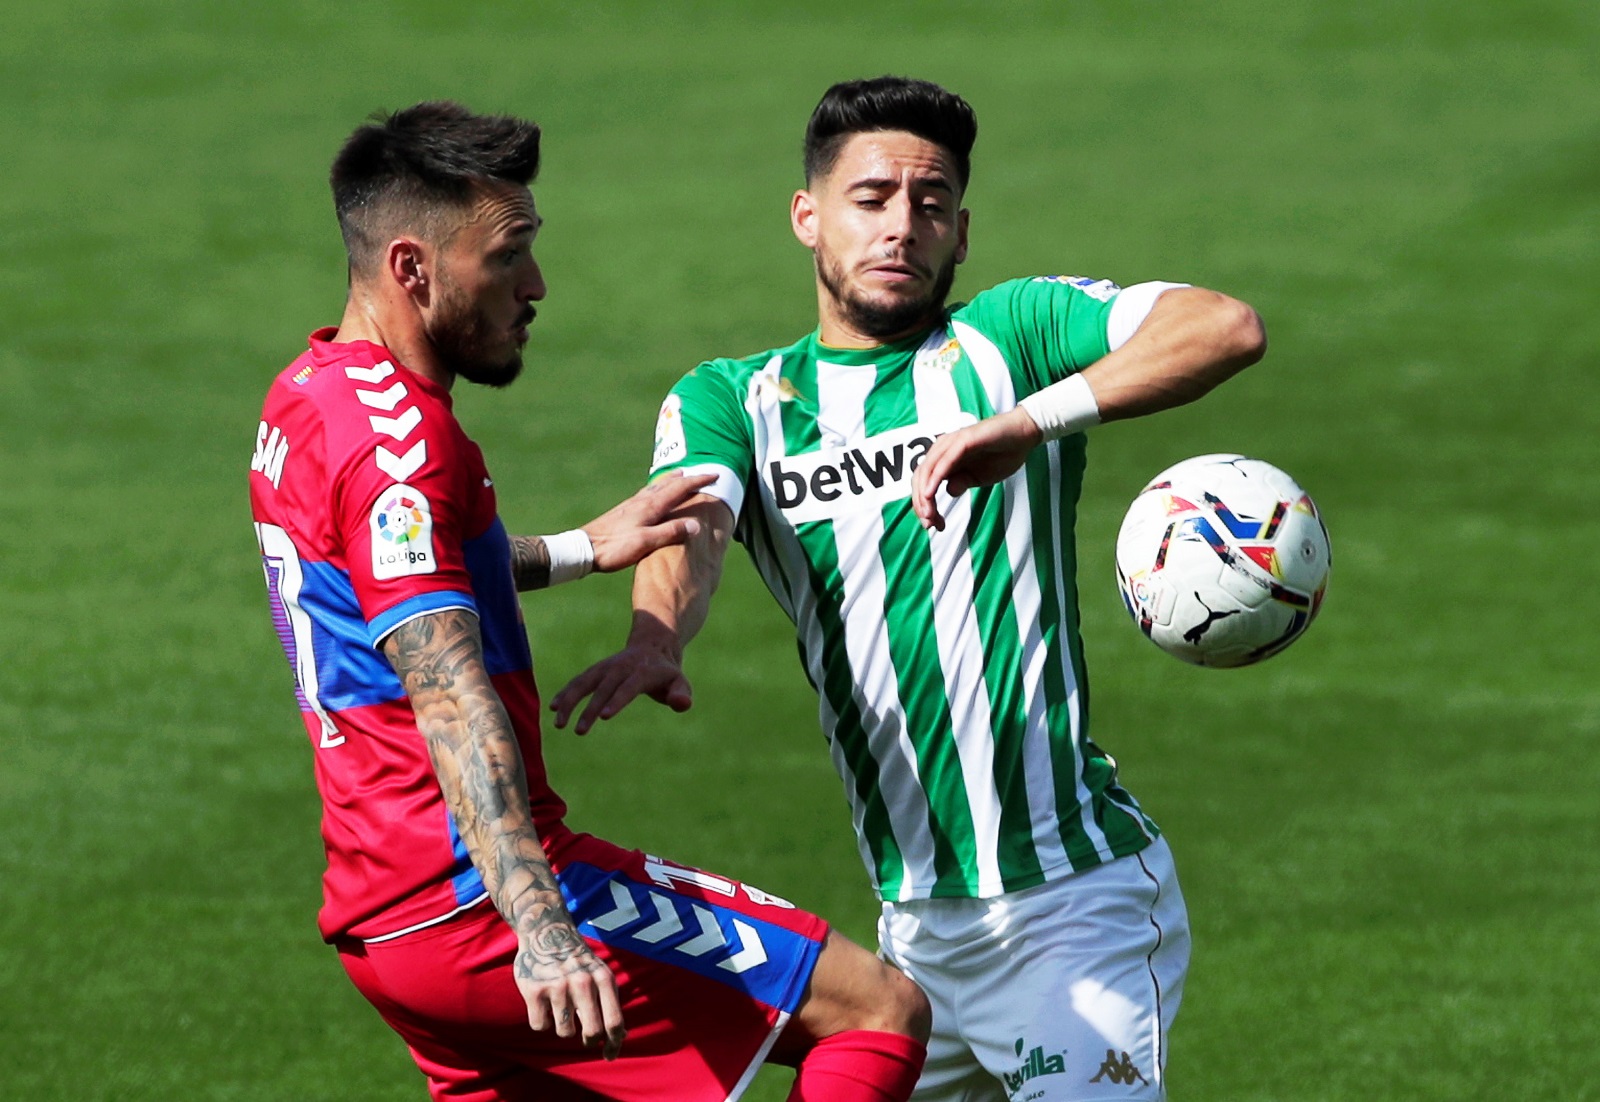 epa08791019 Real Betis' Alex Moreno (R) in action against Elche's Josan (L) during the Spanish La Liga soccer match between Real Betis and Elche CF at Benito Villamarin stadium in Seville, southern Spain, 01 November 2020.  EPA/Julio Munoz